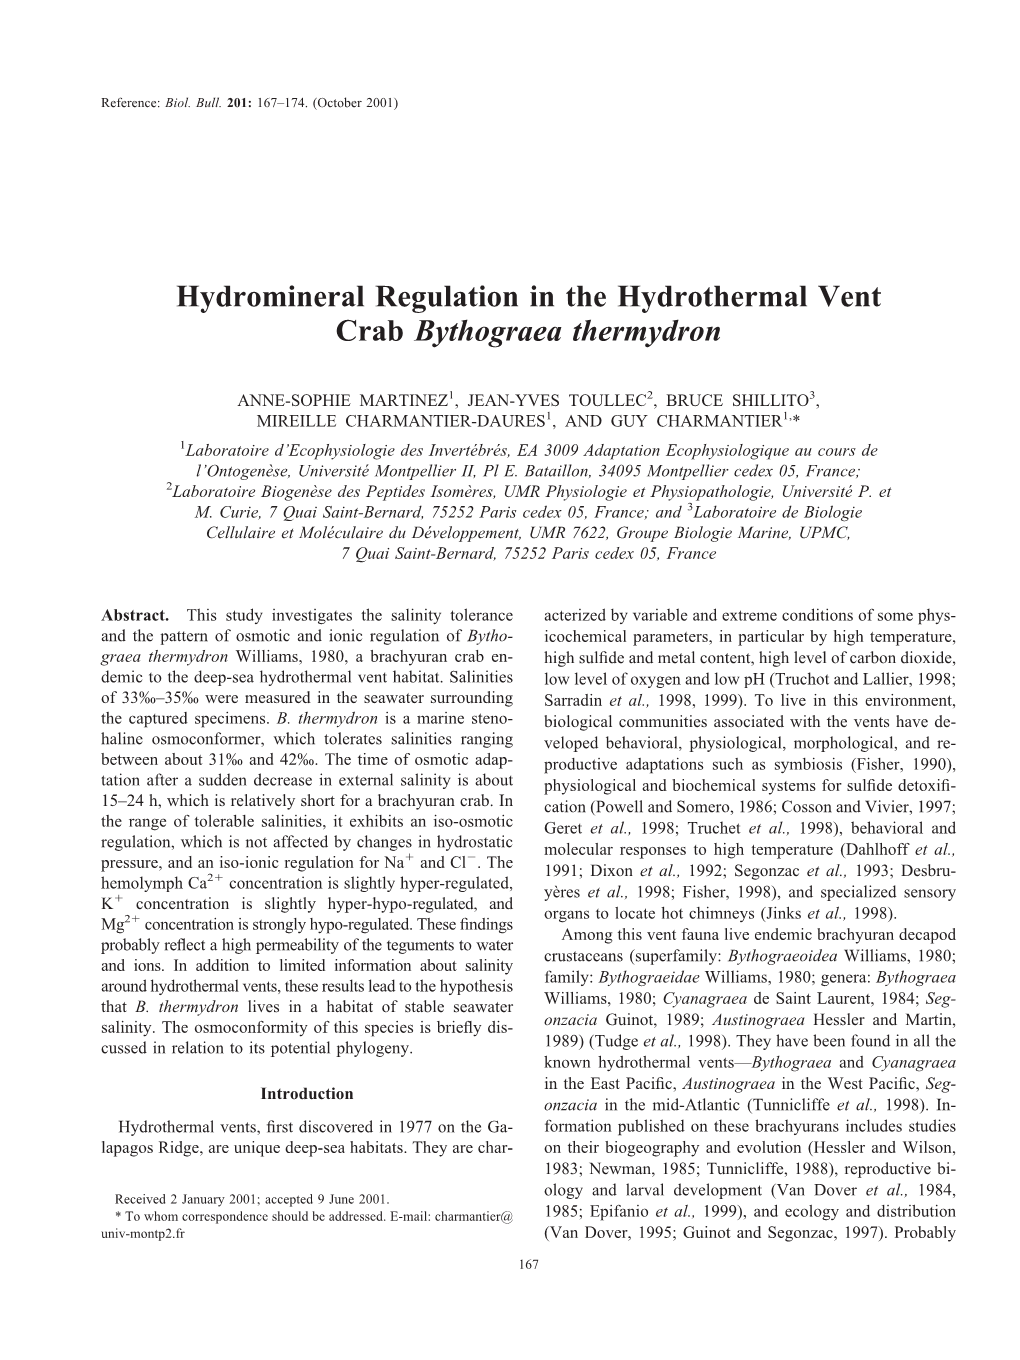 Hydromineral Regulation in the Hydrothermal Vent Crab Bythograea Thermydron